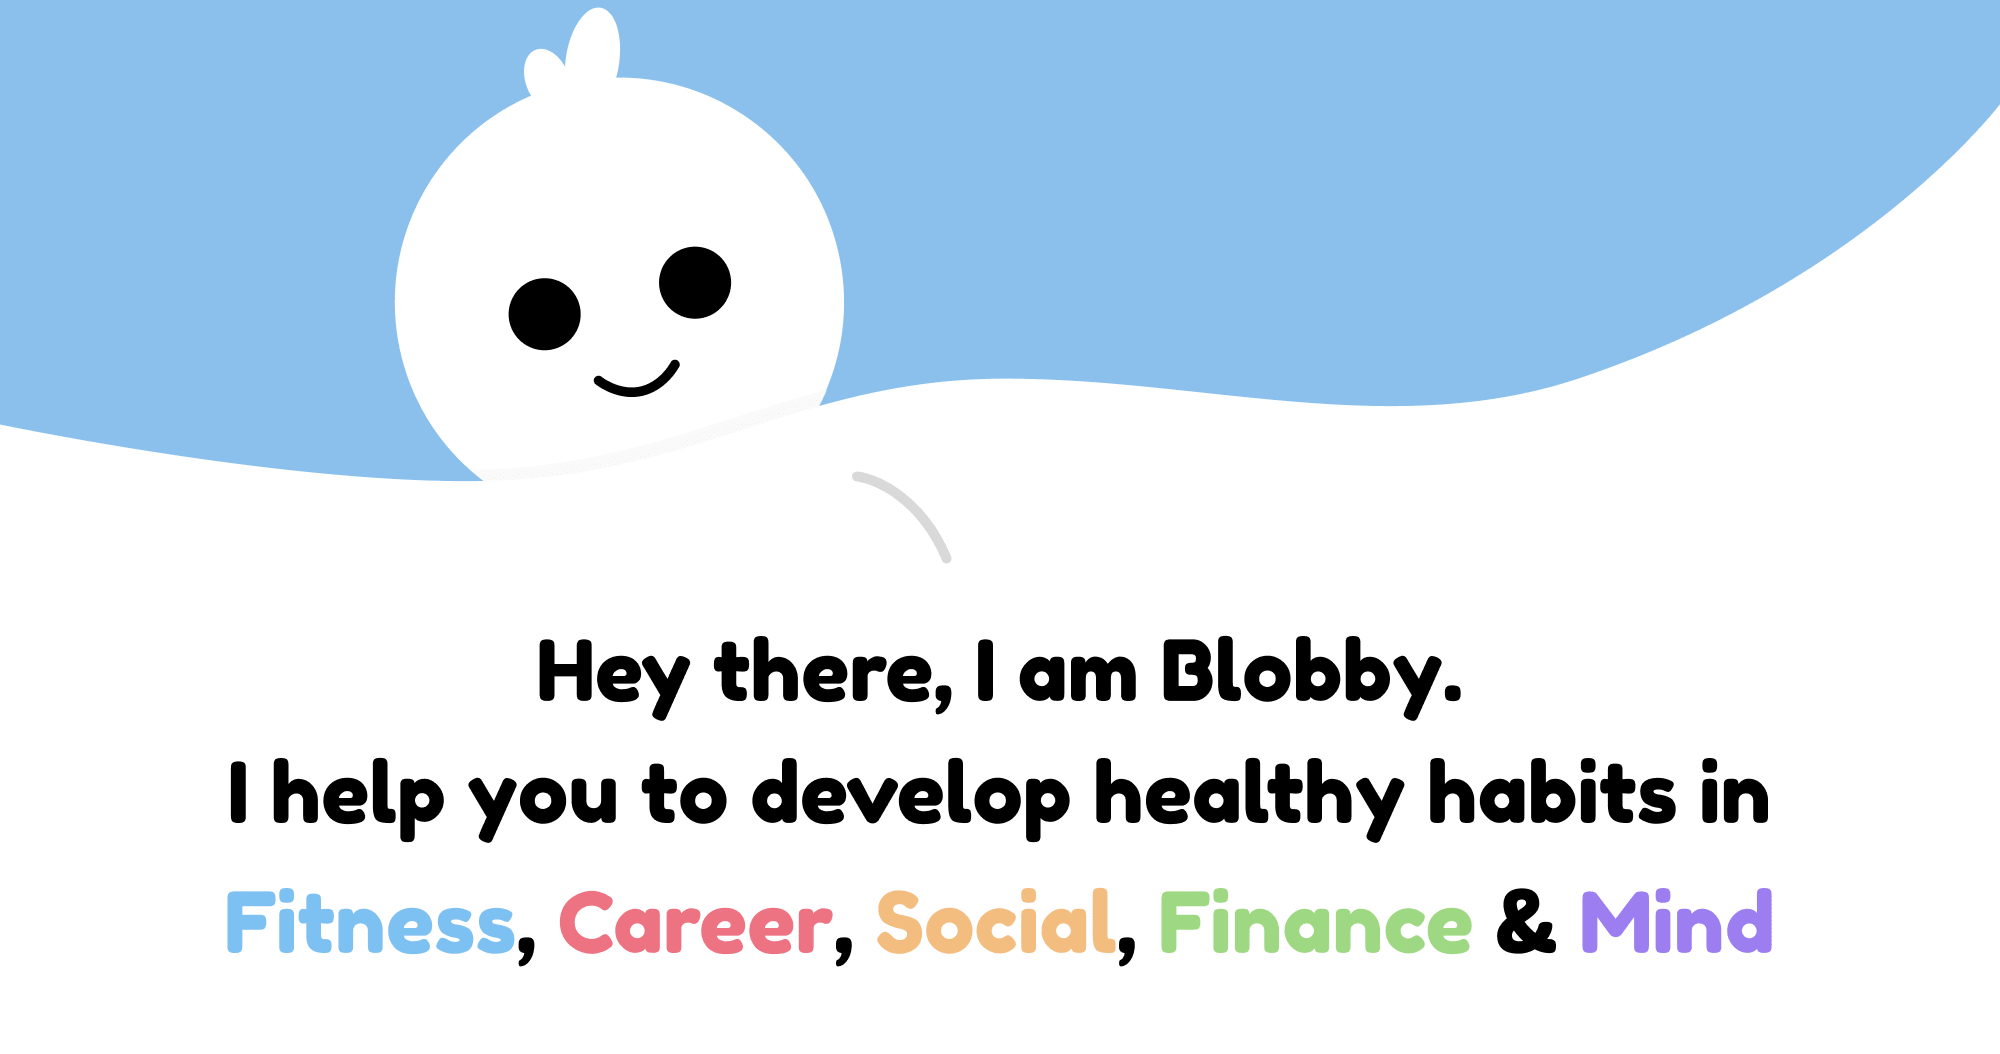 Hey there, I am Blobby. I help you to develop healthy habits in Fitness, Career, Social, Finance & Mind